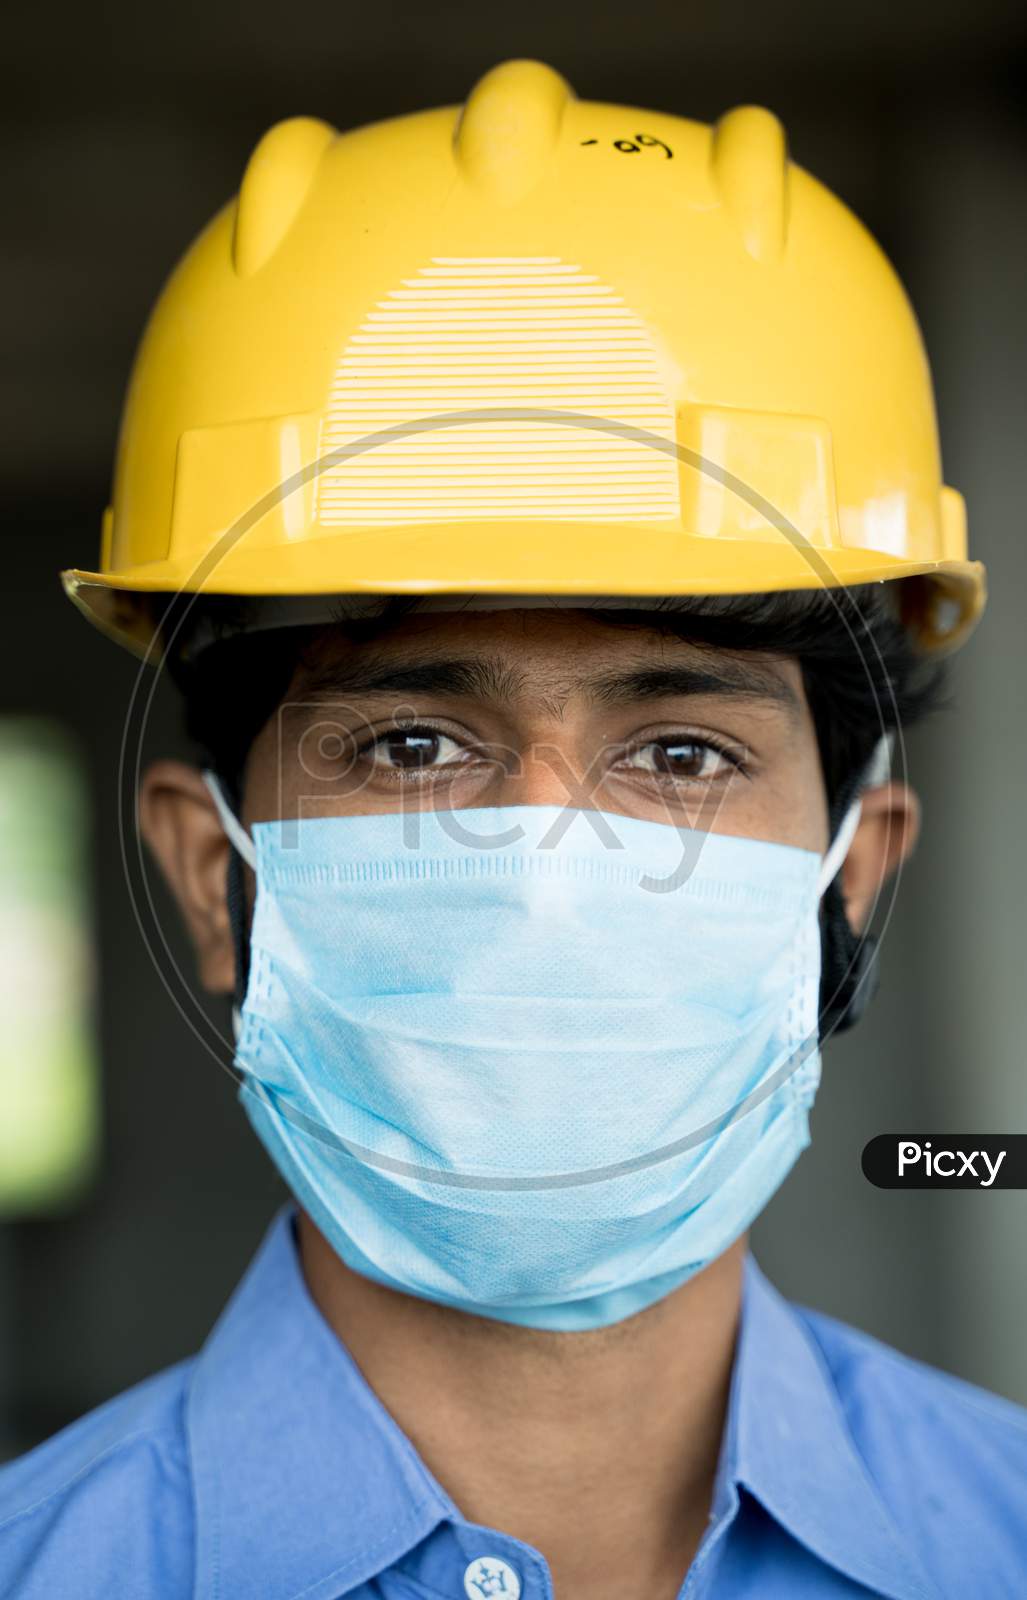 Head Shot Of Construction Worker, Reopening Of Construction Sites Or Industry - Construction Worker In A Construction Helmet With Medical Mask Due To Coronavirus Or Covid-19 Pandemic.